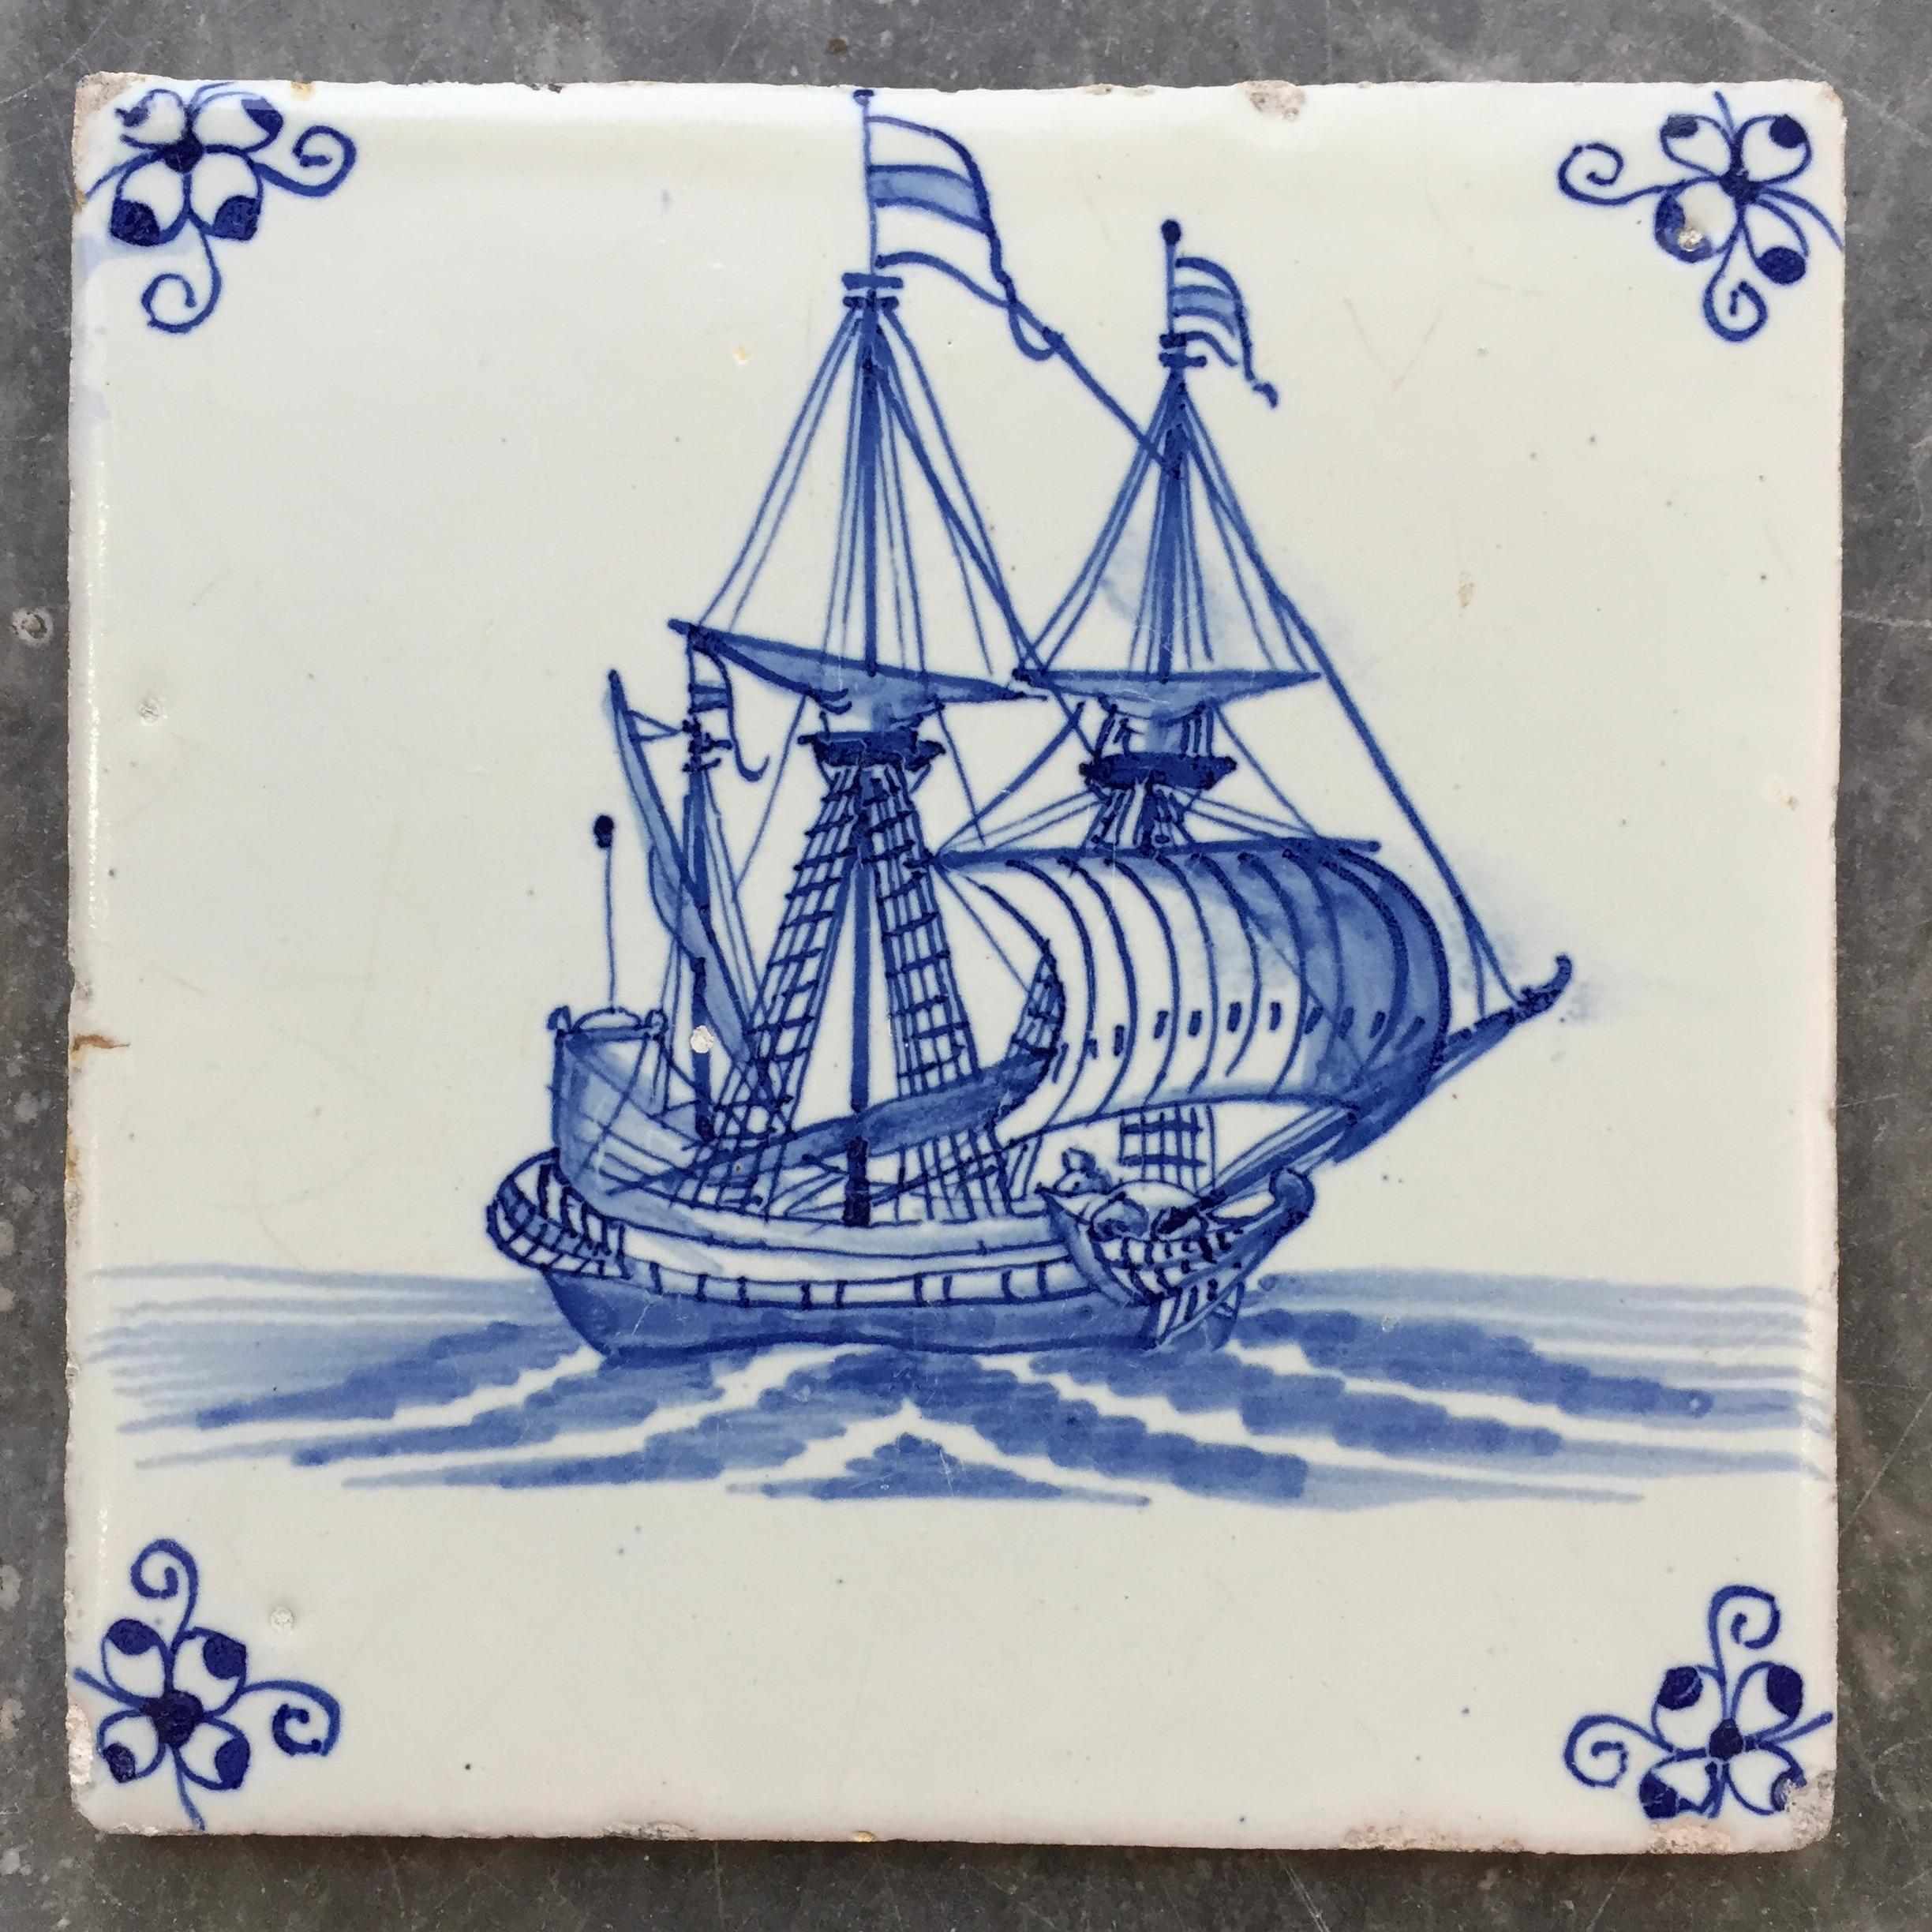 The Netherlands
Amsterdam
Circa 1660 - 1680

A fine-painted Dutch Delft tile made in Amsterdam with a decoration of a three-master merchant ship or Dutch East-Indian trading company VOC ship.

A genuine collectible of approximately 350 years